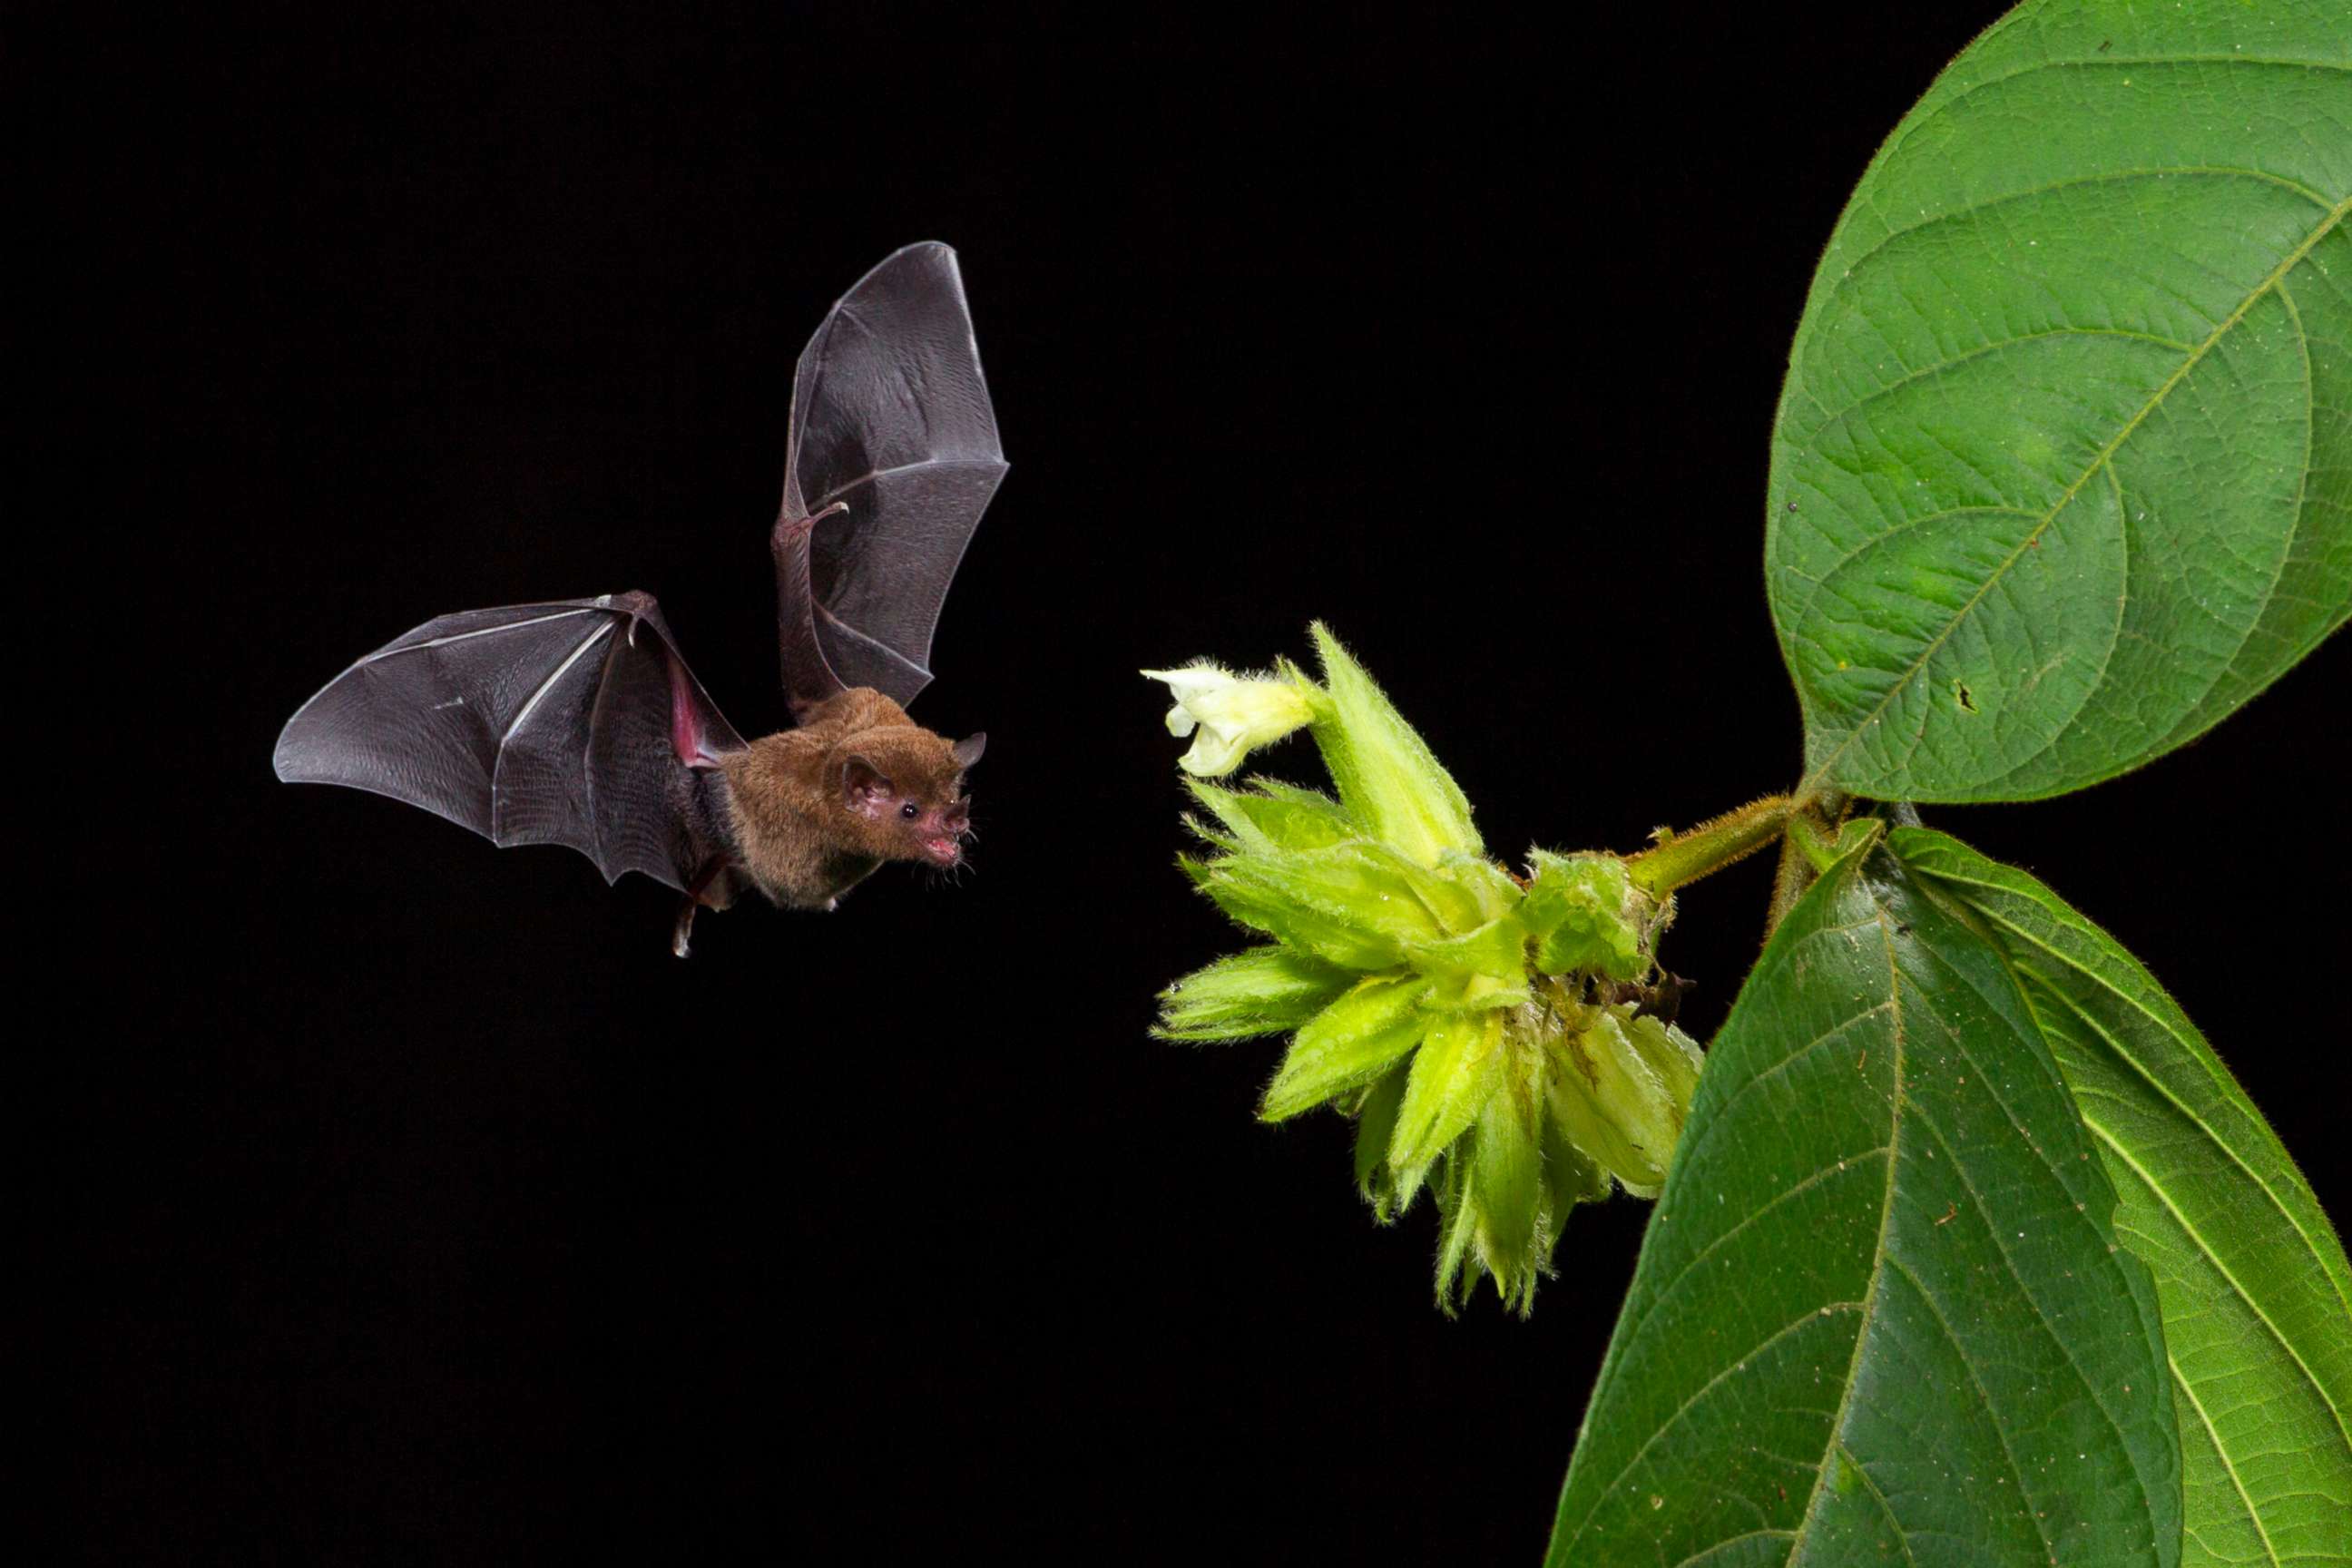 PHOTO: In this undated file photo, a long-tongue bat flies toward a tropical flower.